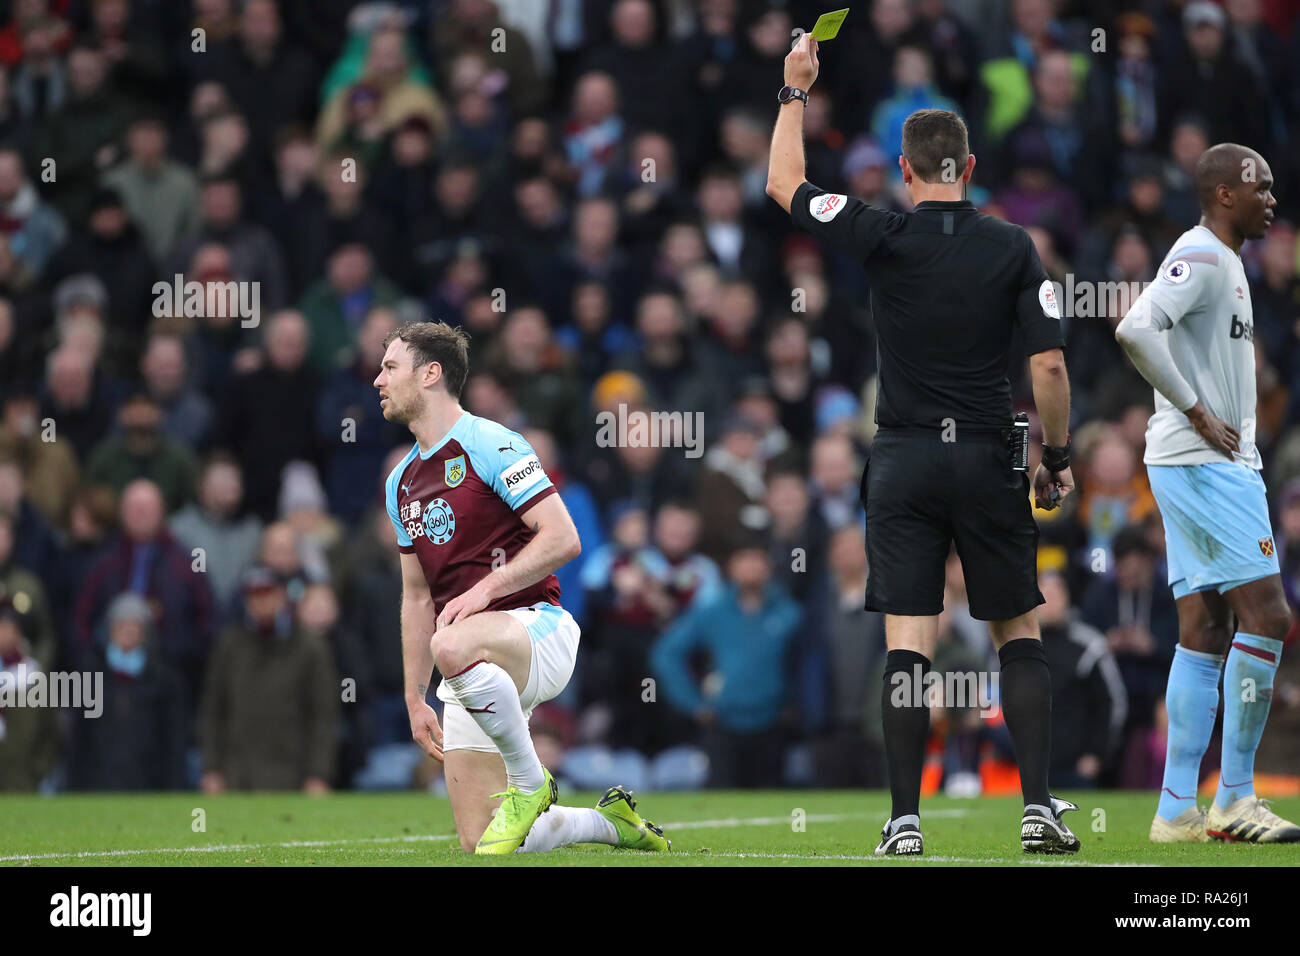 Burnley's Ashley Barnes (left) is booked for unsporting behaviour by referee David Coote during the Premier League match at Turf Moor, Burnley. Stock Photo